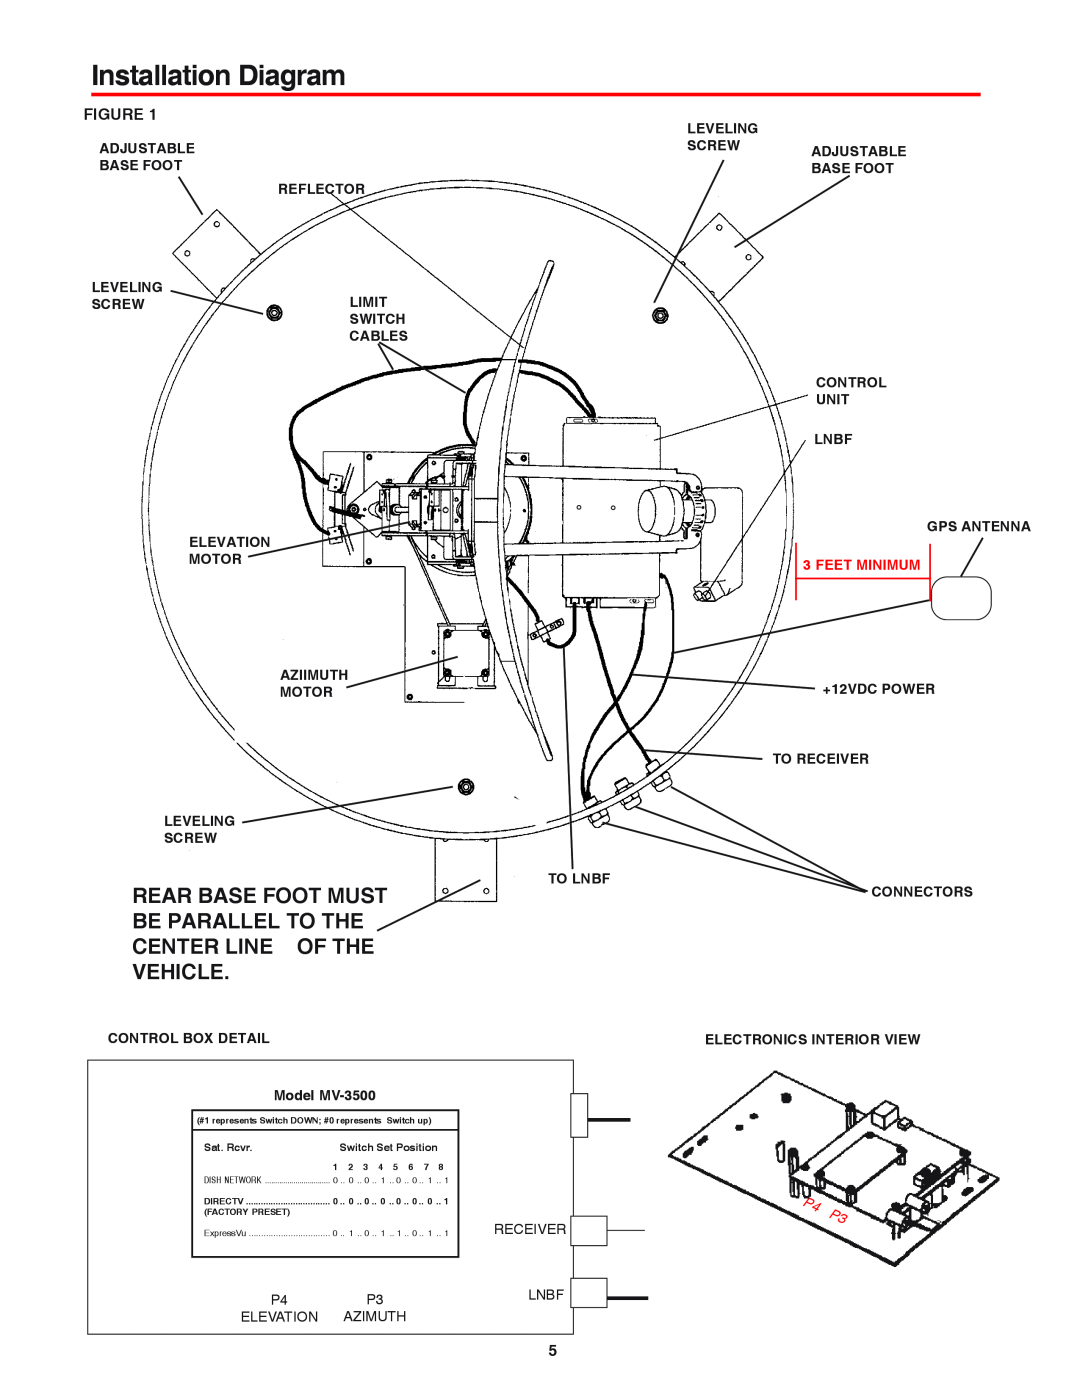 Winegard MV-3500 Installation Diagram, Rear Base Foot Must Be Parallel To The Center Line Of The Vehicle, Feet Minimum 